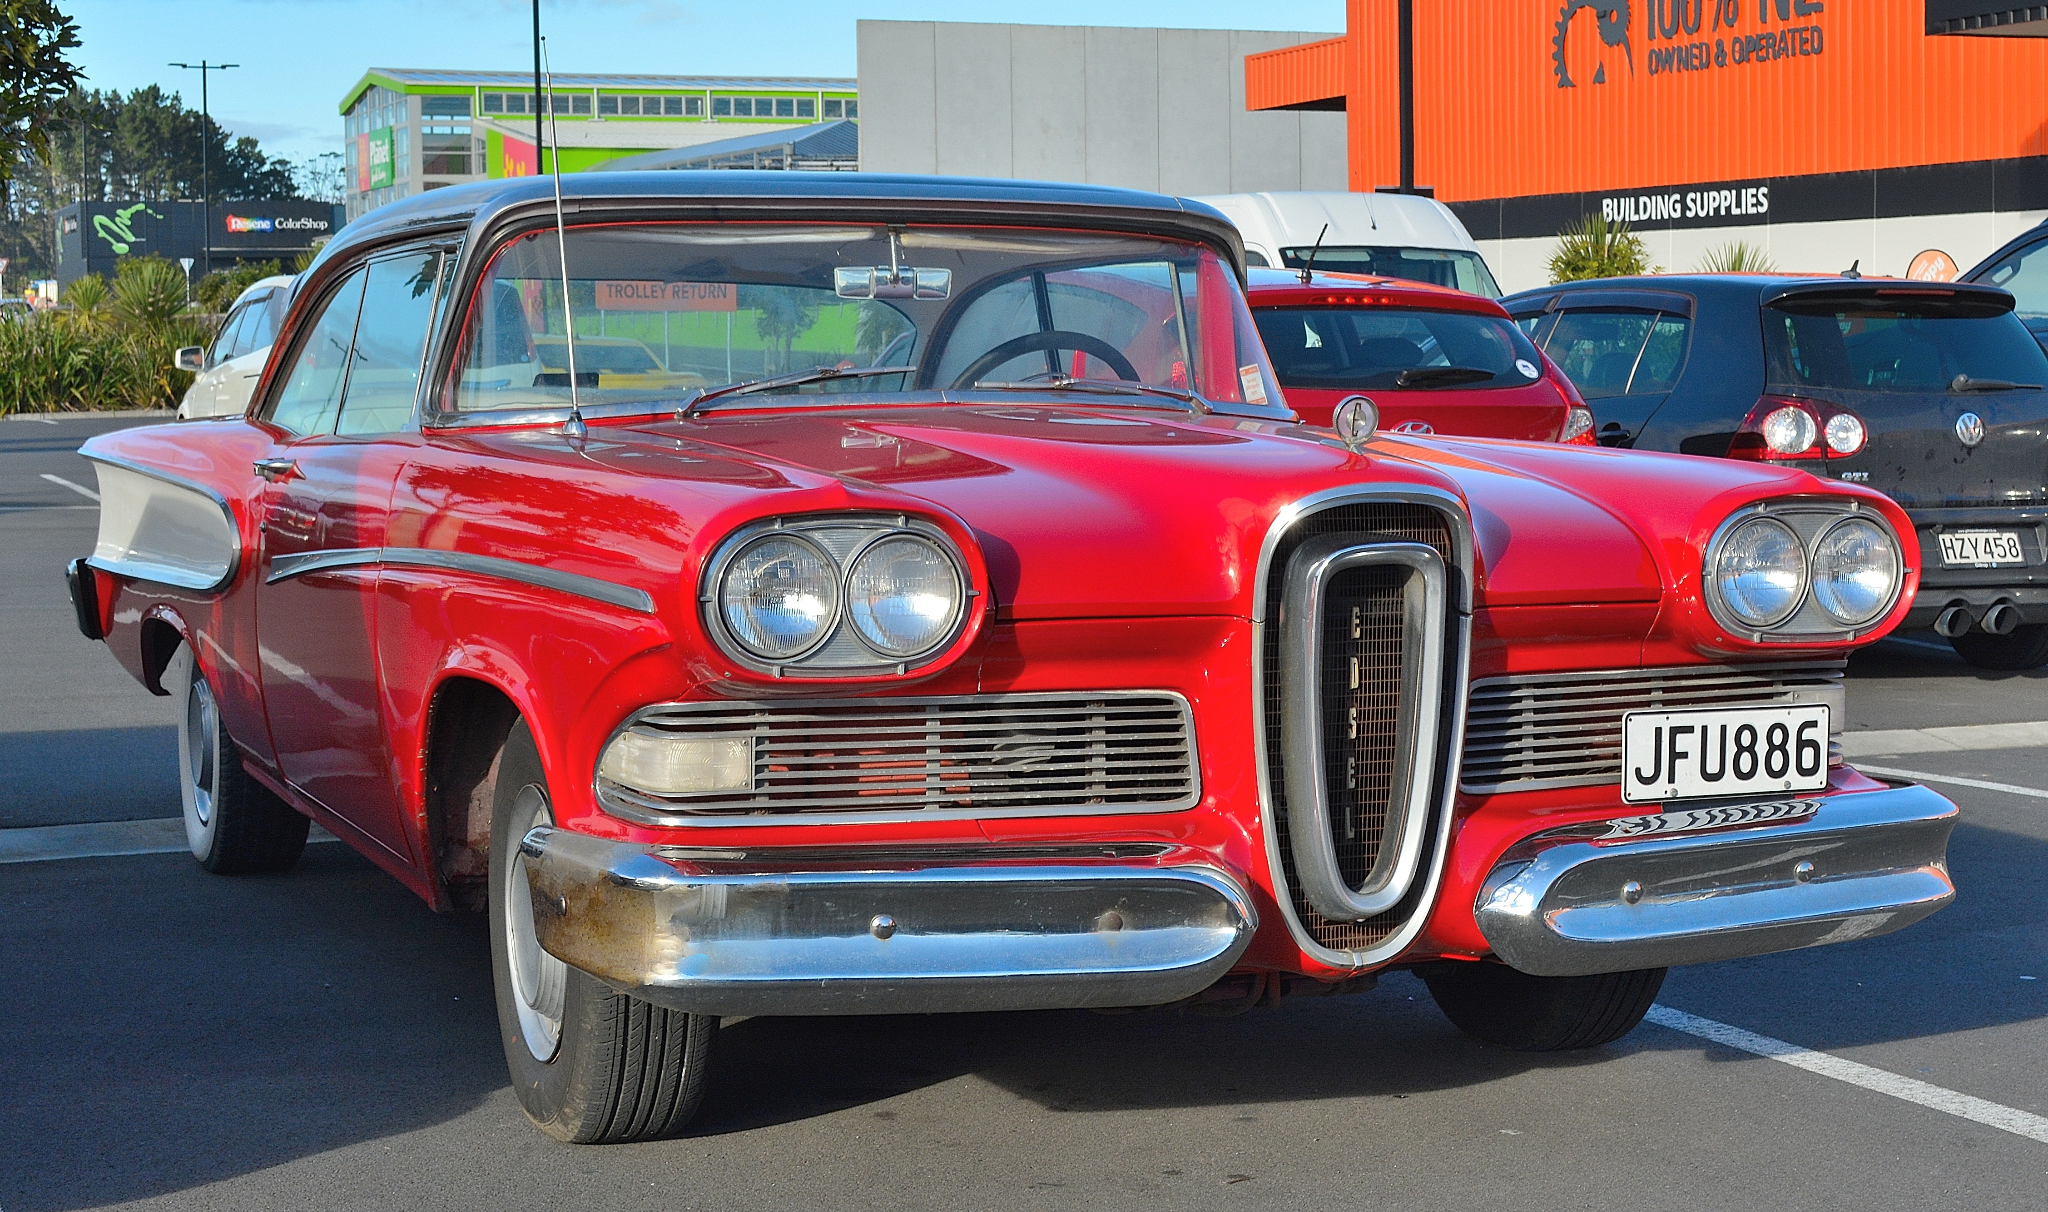 Red Ford Edsel